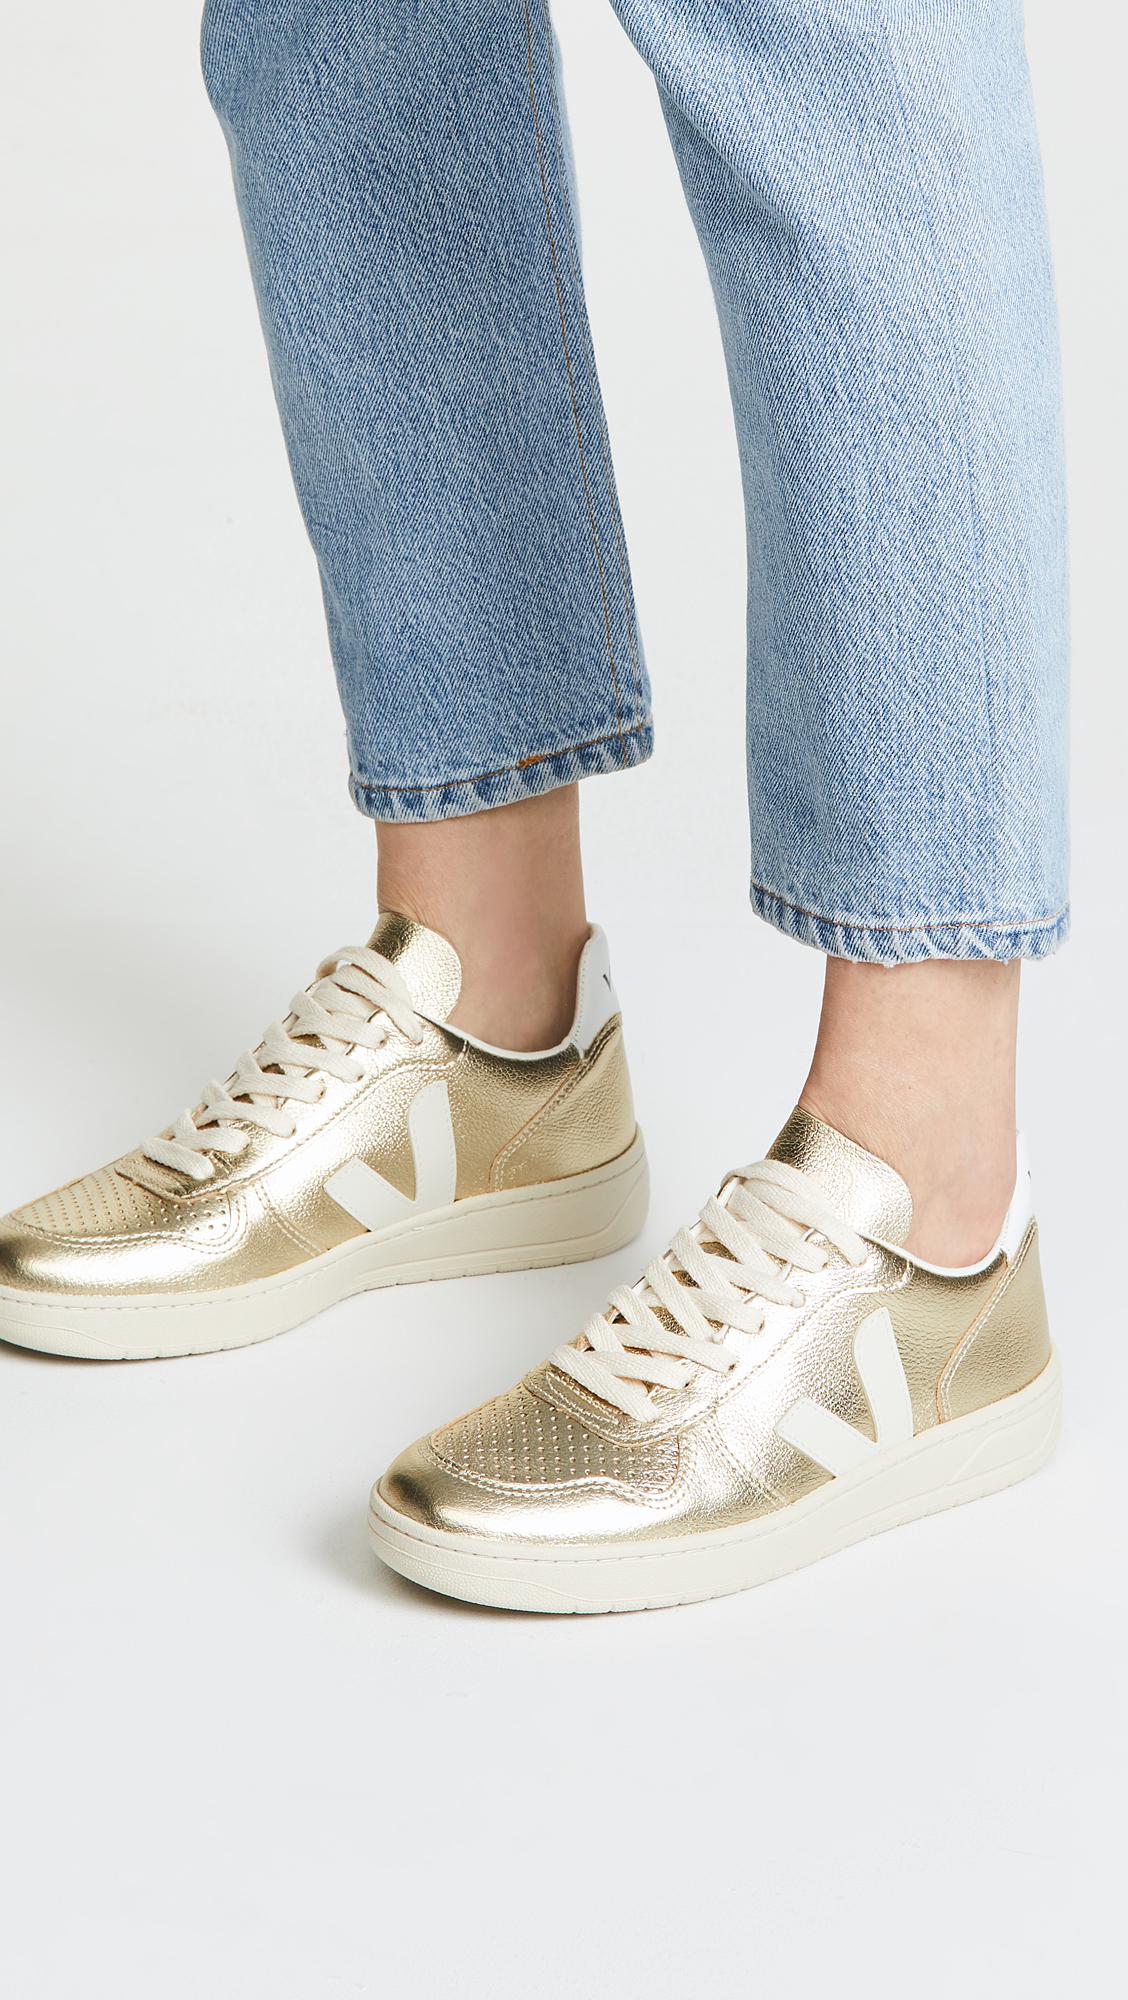 Veja Leather V-10 Sneakers in Gold (Metallic) | Lyst